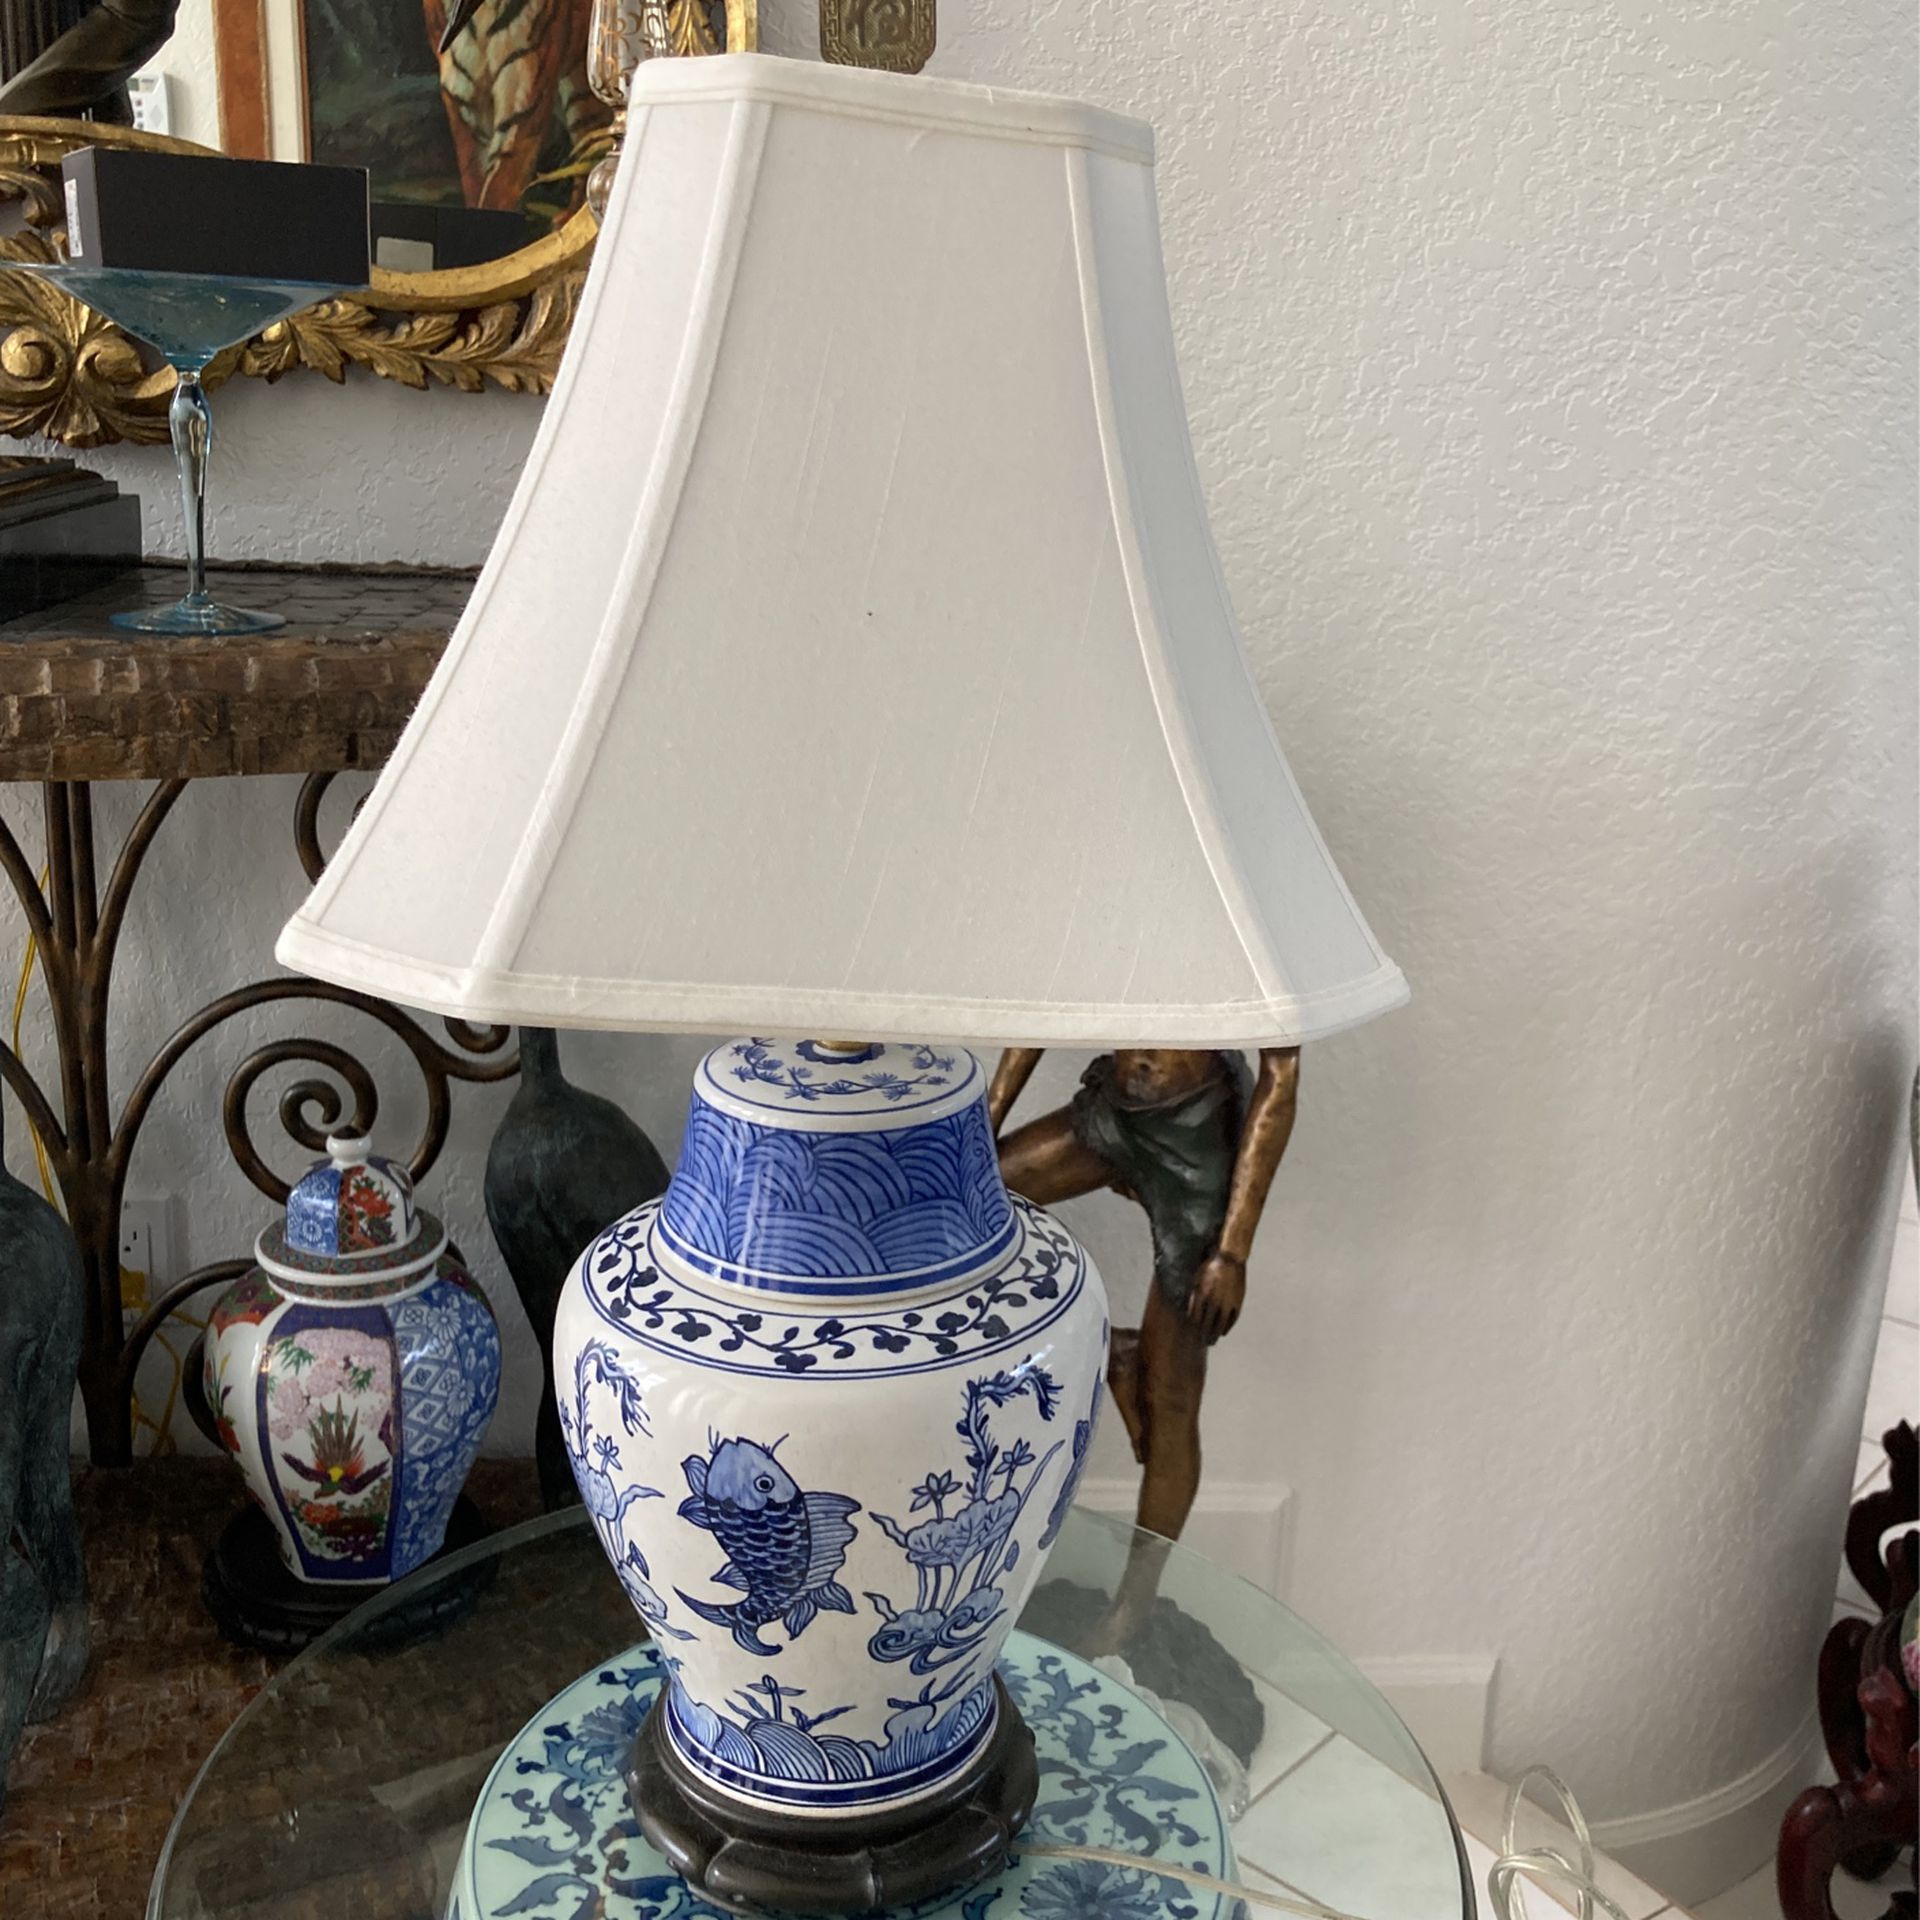 Beautiful Blue & White Antique Asian Chinese Chinoiserie Ginger Jar Koi Fish Lamp. Porcelain & Brass Symbol Finial. Wood Pedestal Stand. Nice Shade.